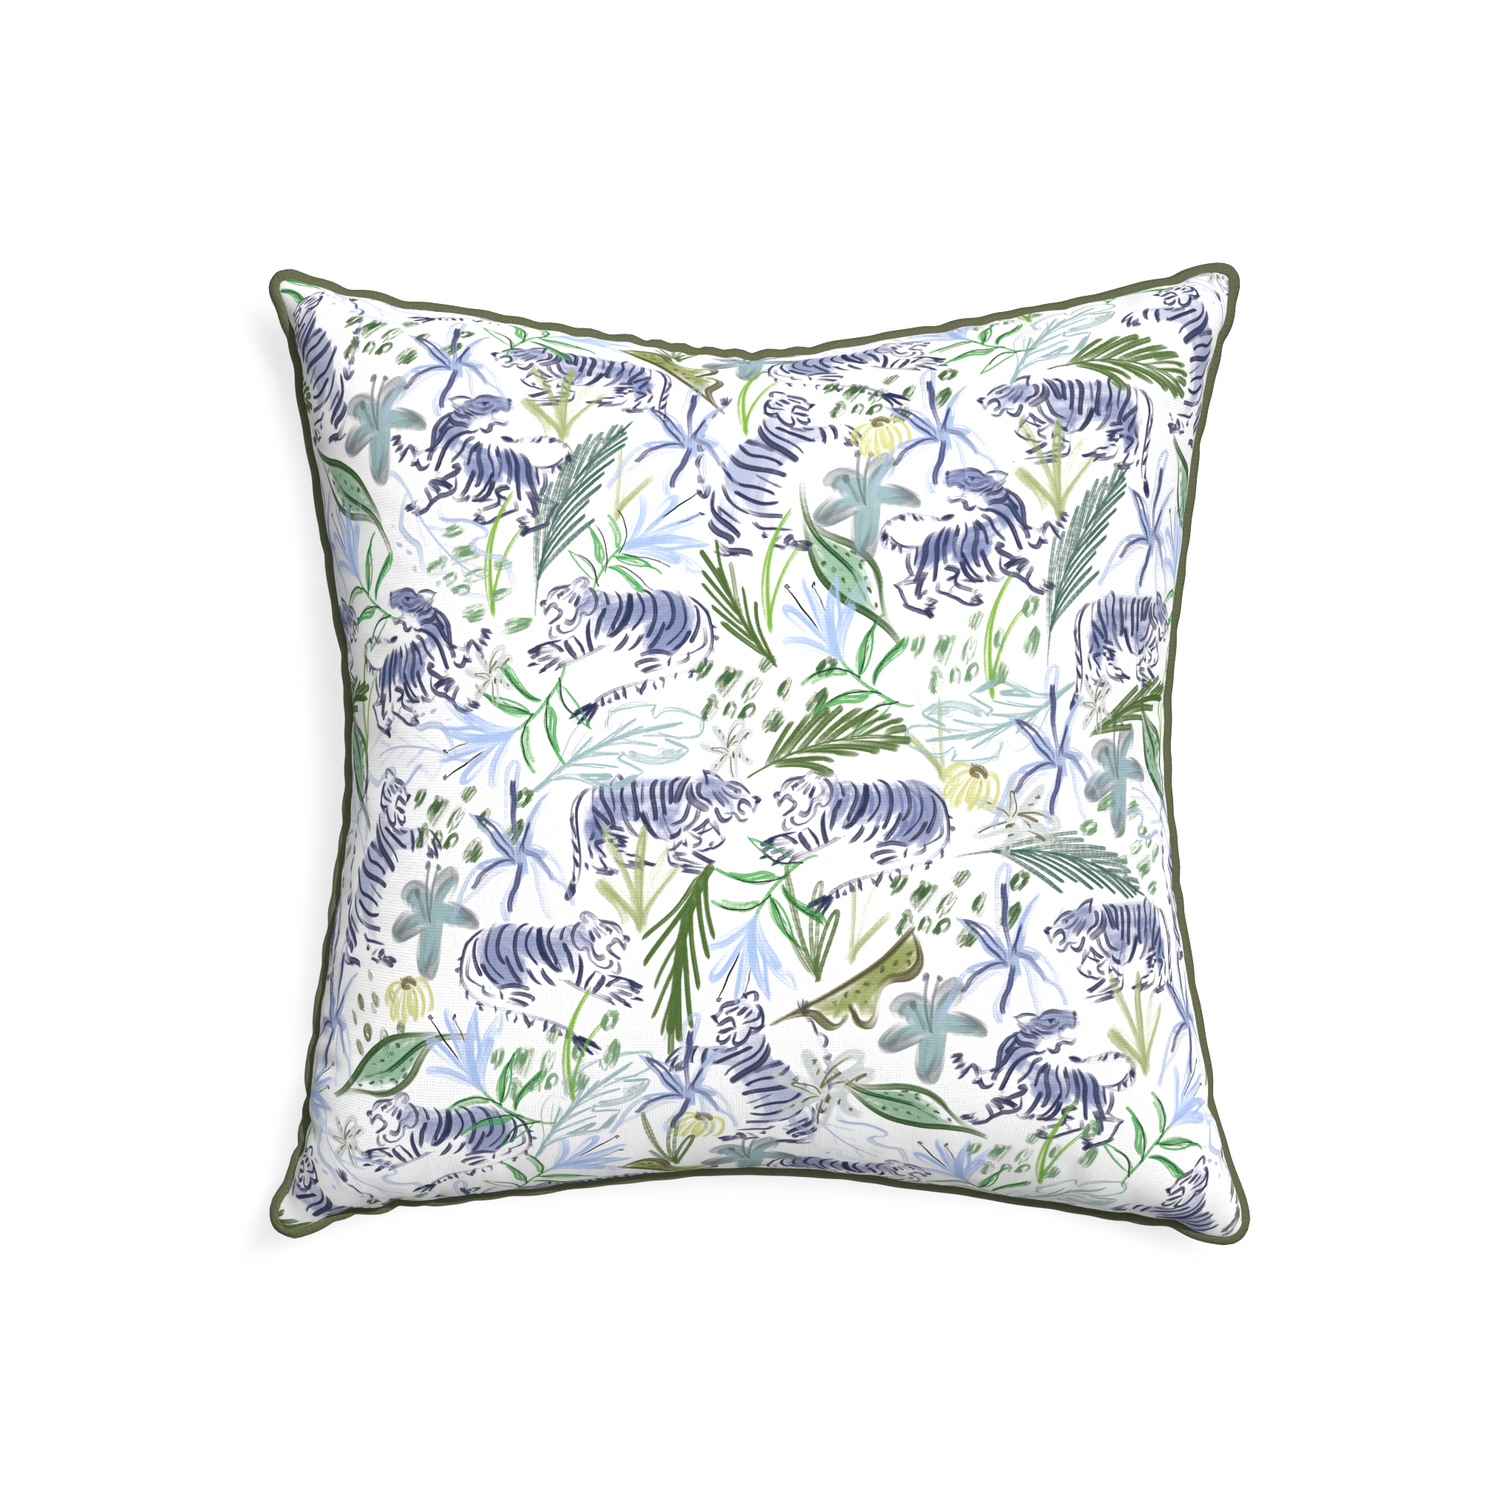 22-square frida green custom pillow with f piping on white background